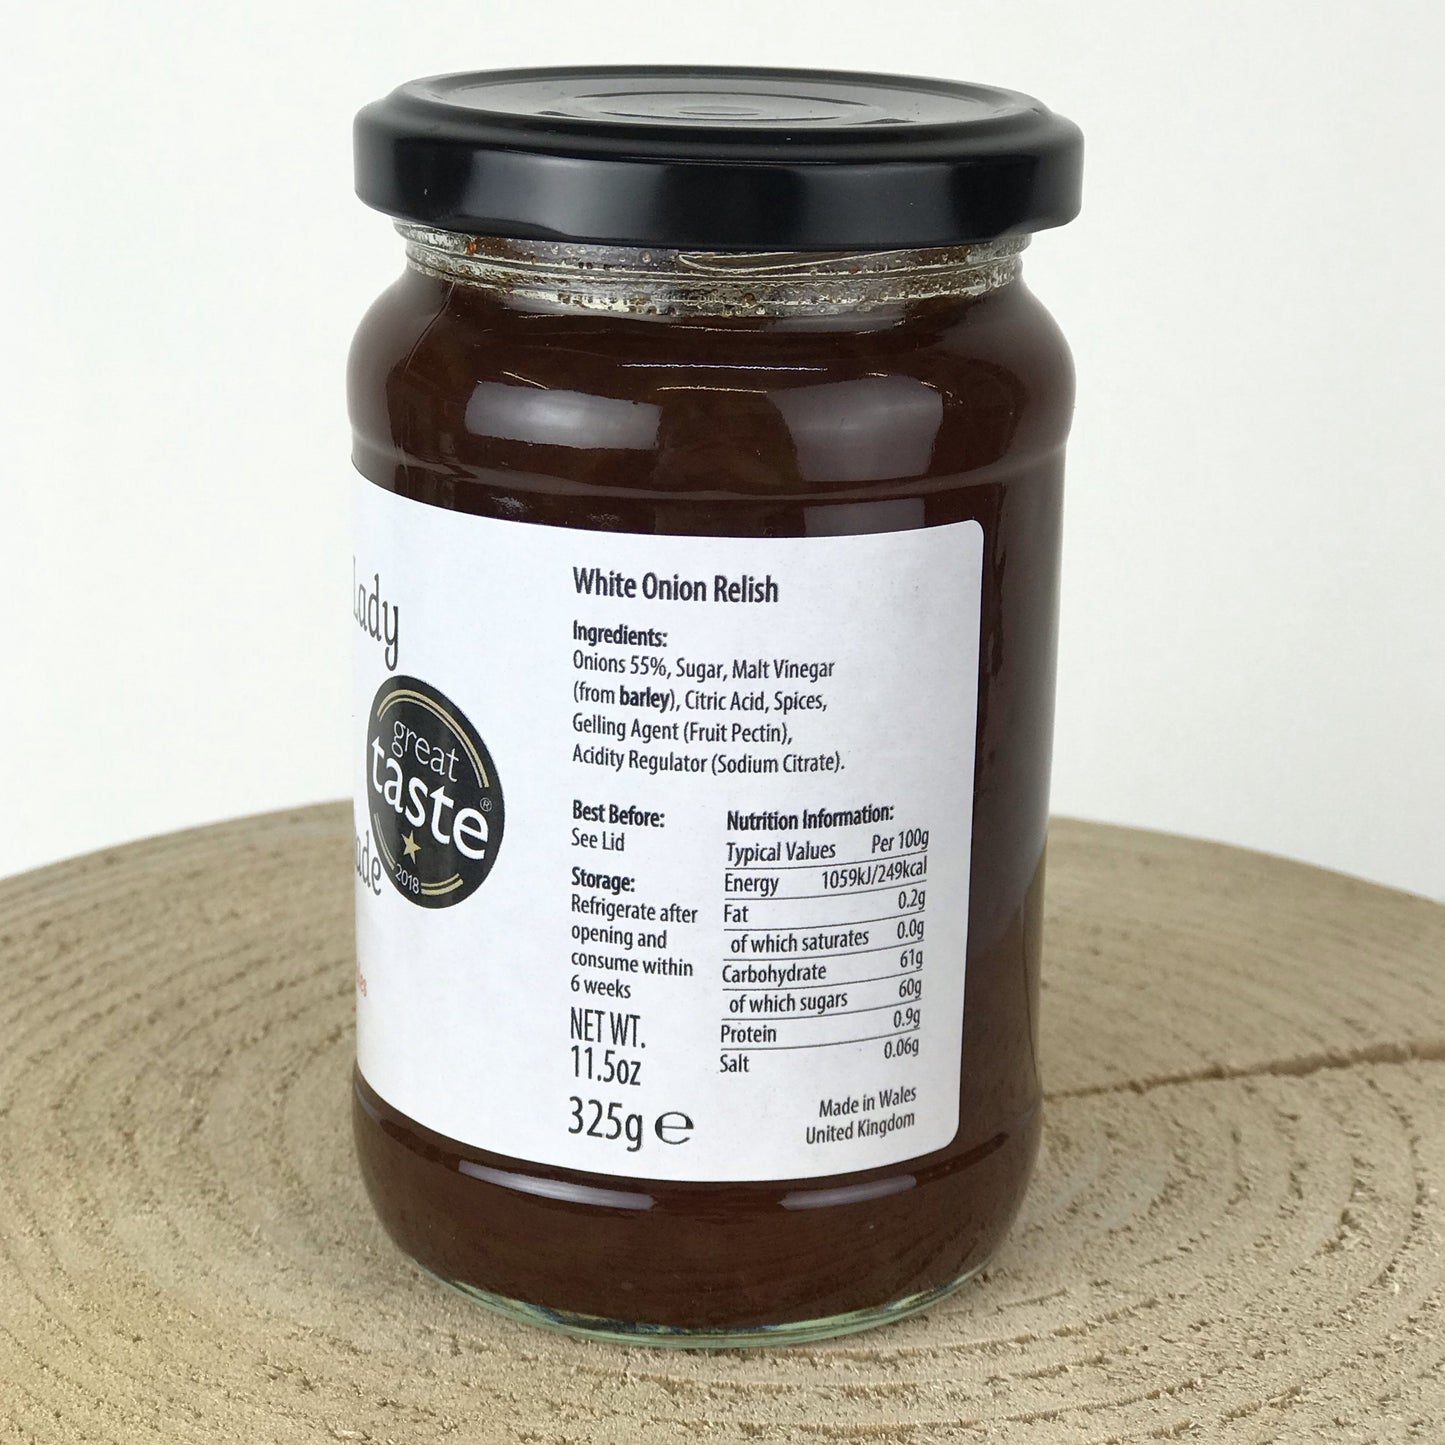 Onion Marmalade by Welsh Lady Preserves